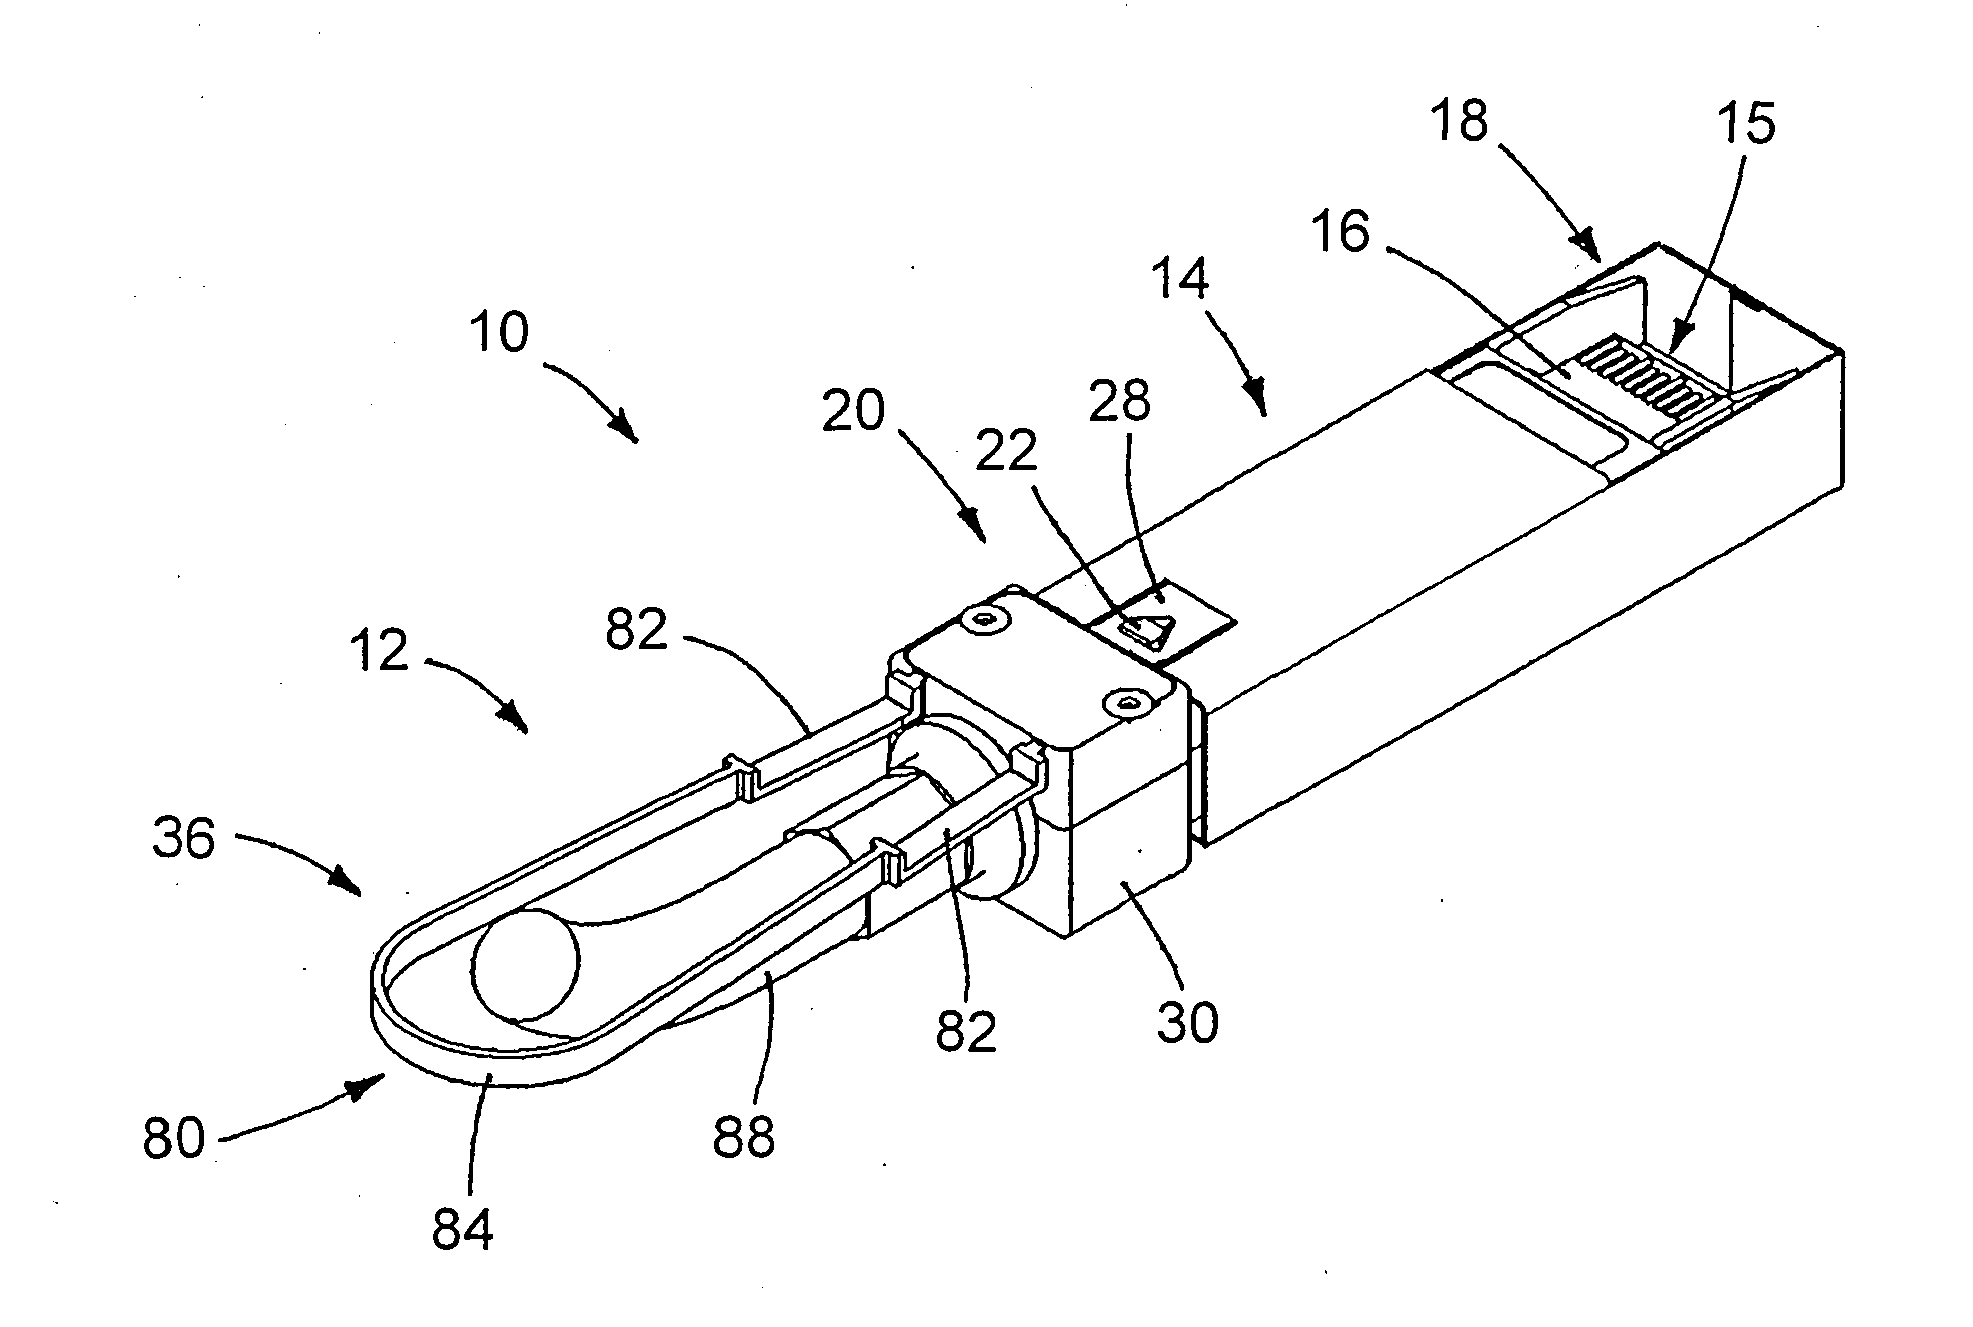 Electrical cable connector latch mechanism